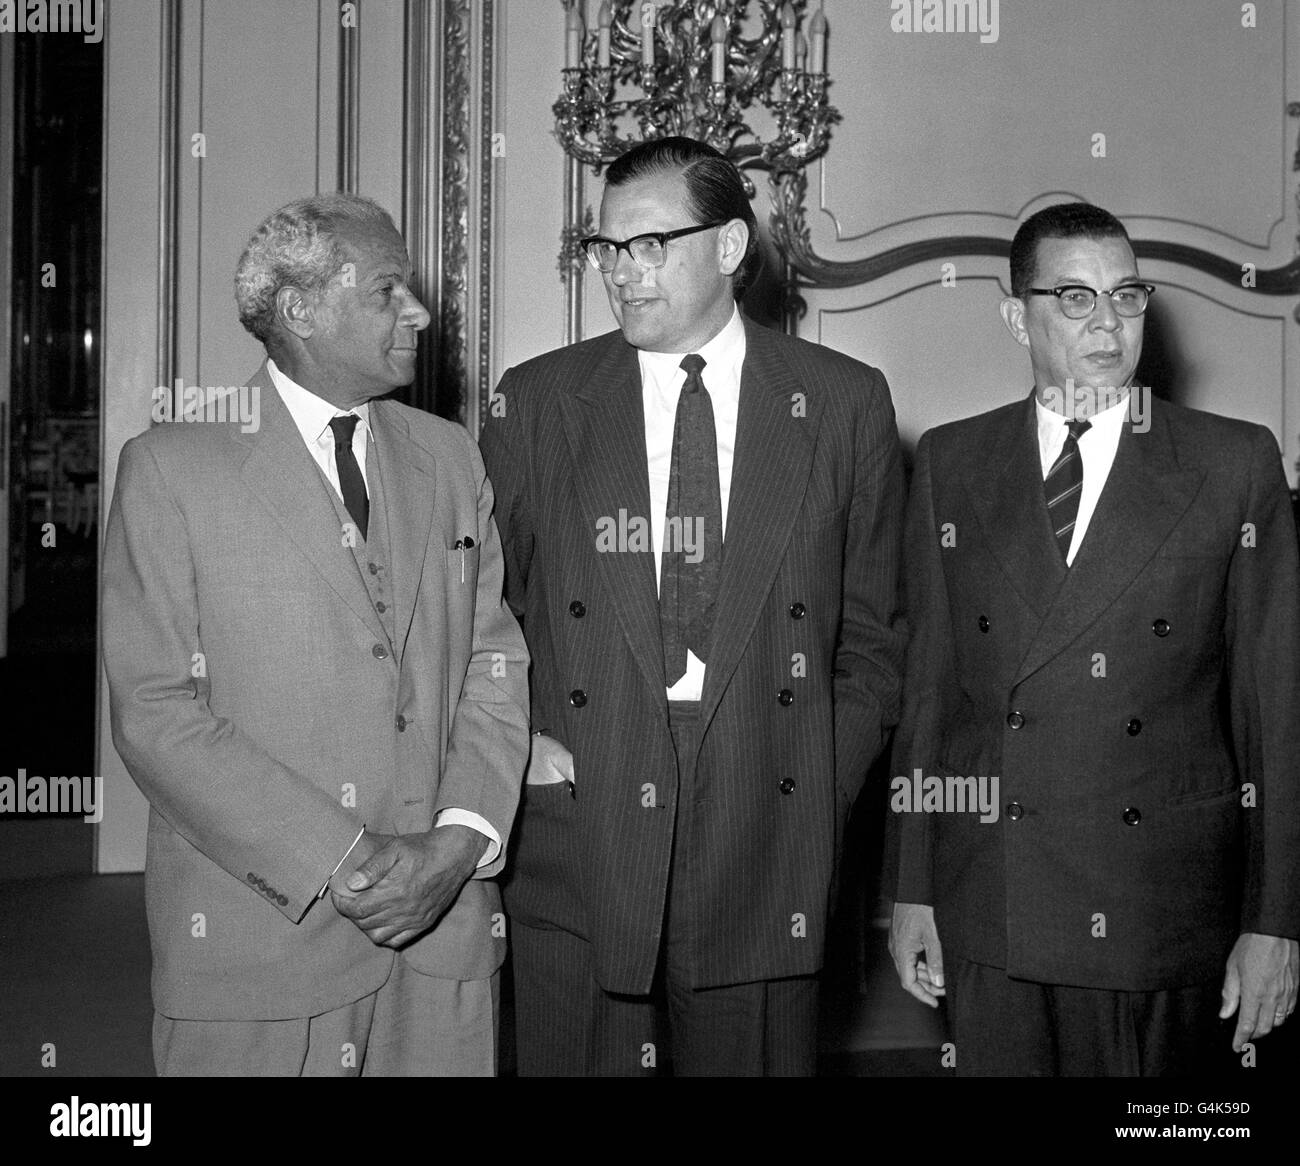 Reginald Maudling, Colonial Secretary, centre, with Norman Manley, Prime Minister of Jamaica, left, and Donald Sangster, Deputy Leader of the Opposition in Jamaica, at the opening of the Jamaica Constitutional Conference in London. Stock Photo